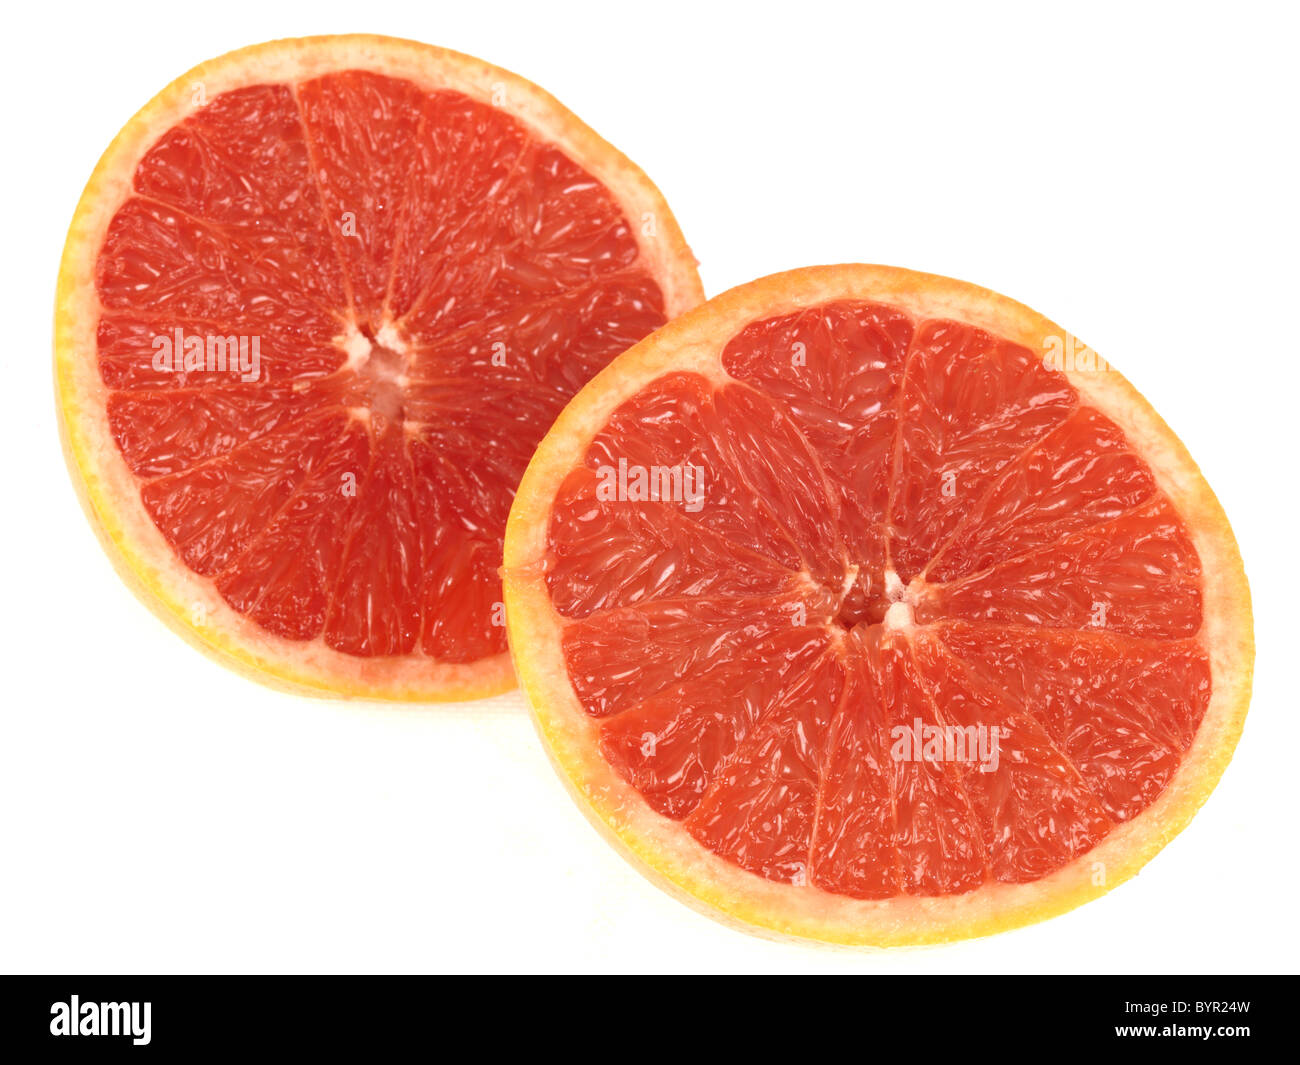 Healthy Fresh Sweet Ripe Breakfast Pink Grapefruit With No People Against A White Background And A Clipping Path Stock Photo